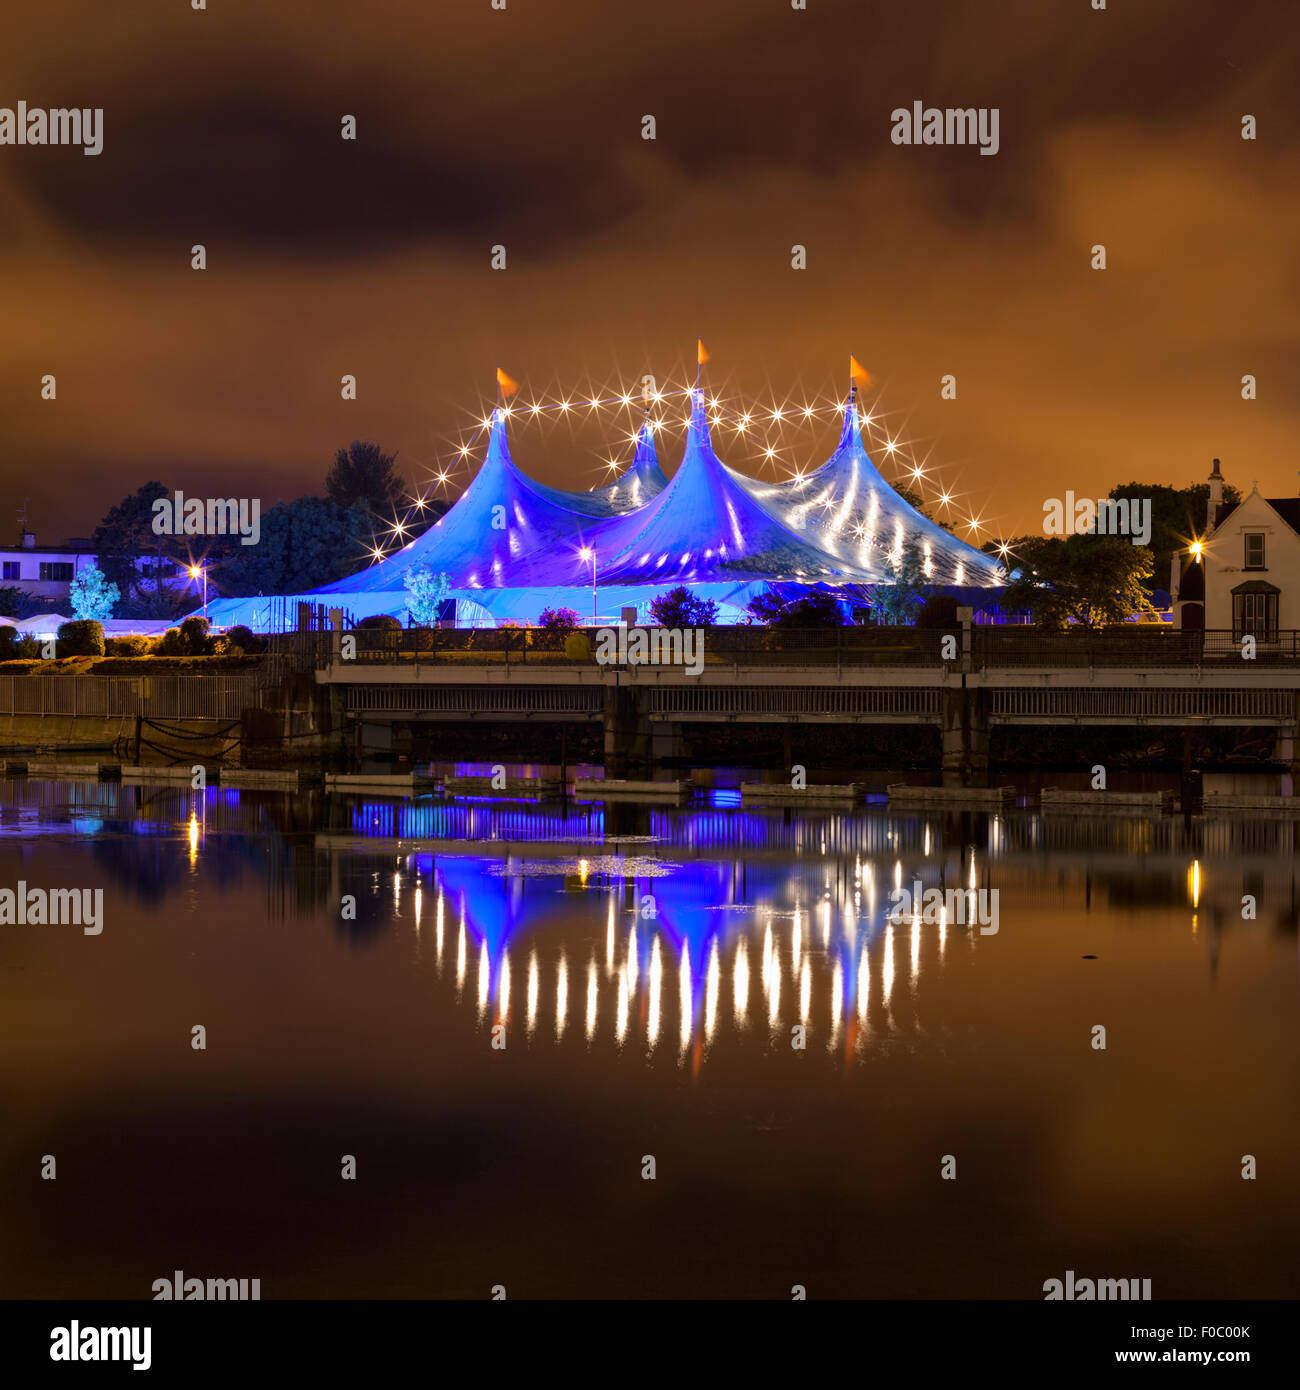 'Big Top' circus style blue tent and row of lights on the bank of Corrib river in Galway, Ireland Stock Photo